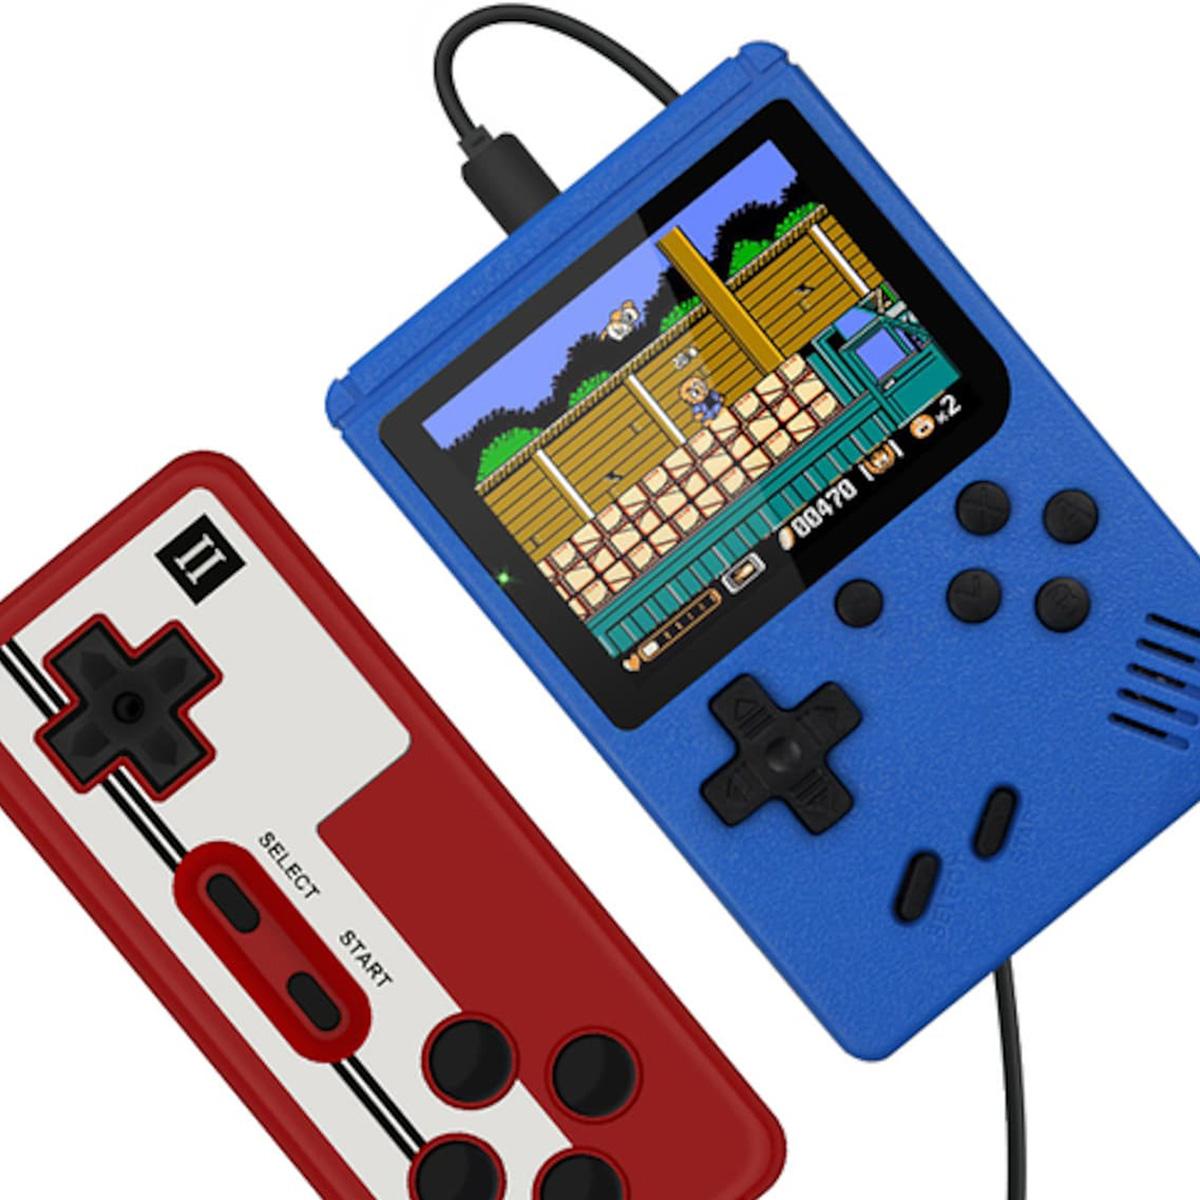 Mini Retro Handheld Game Console for $12.95 Shipped